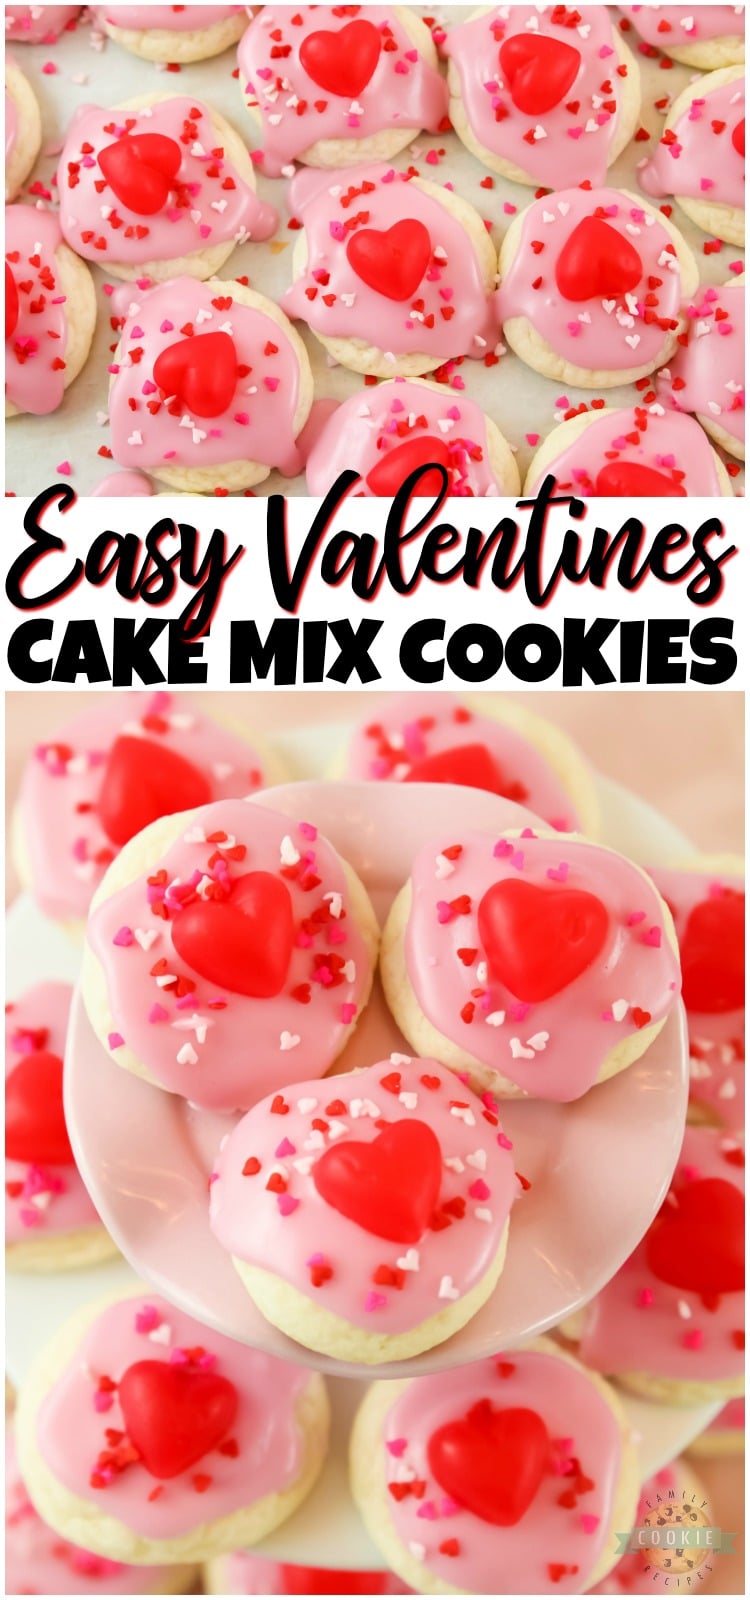 Valentines Cake Mix Cookies made with just 3 ingredients in under 30 minutes! Quick & Easy Valentines dessert recipe for your special someone! #Valentines #cookies #baking #frosting #sprinkles #ValentinesDay #recipe from FAMILY COOKIE RECIPES